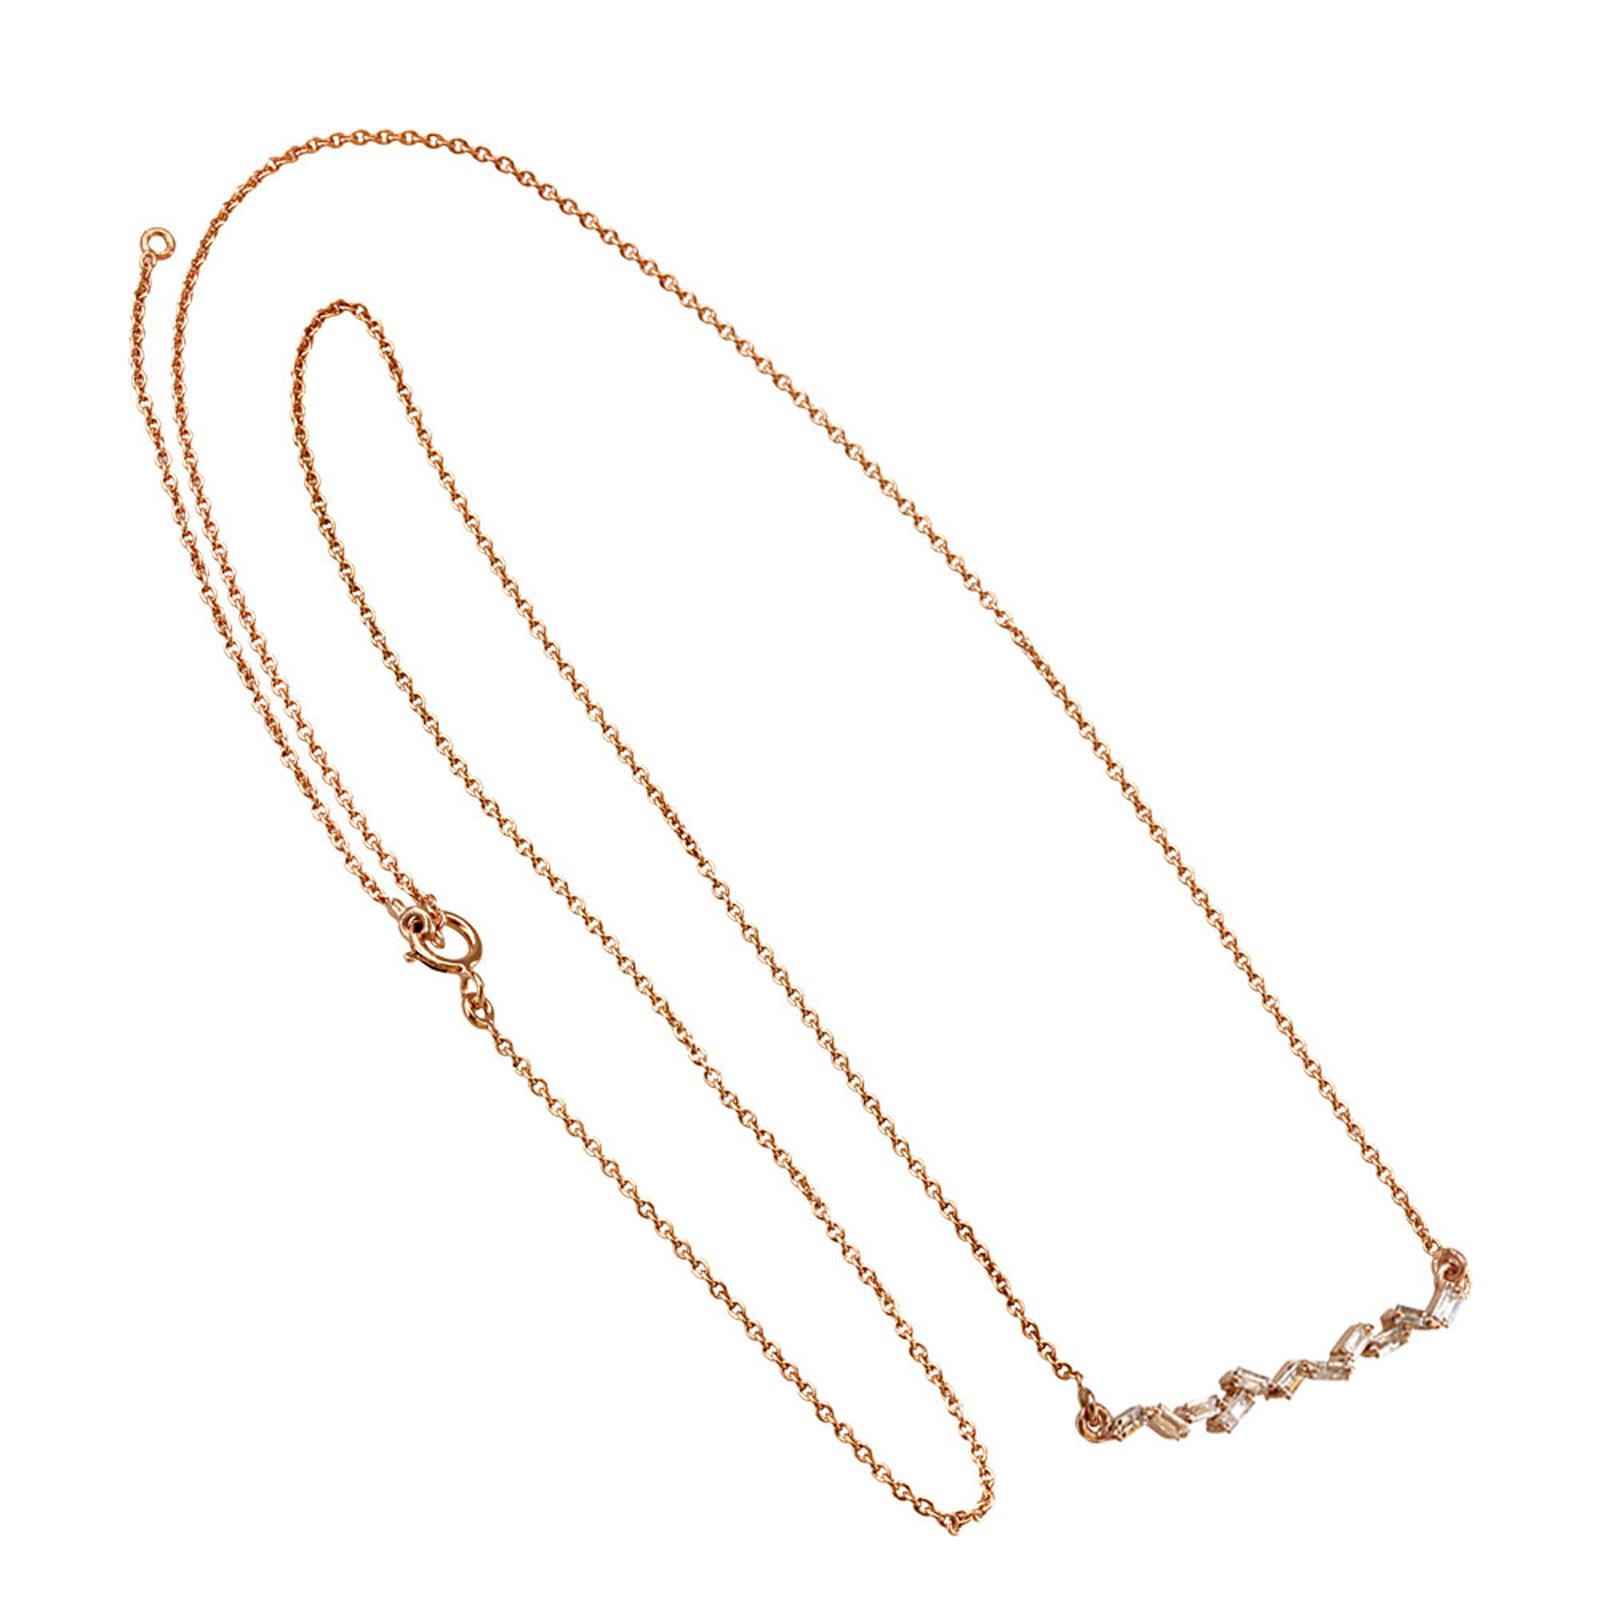 Baguette diamond chain necklace set in 18k solid gold